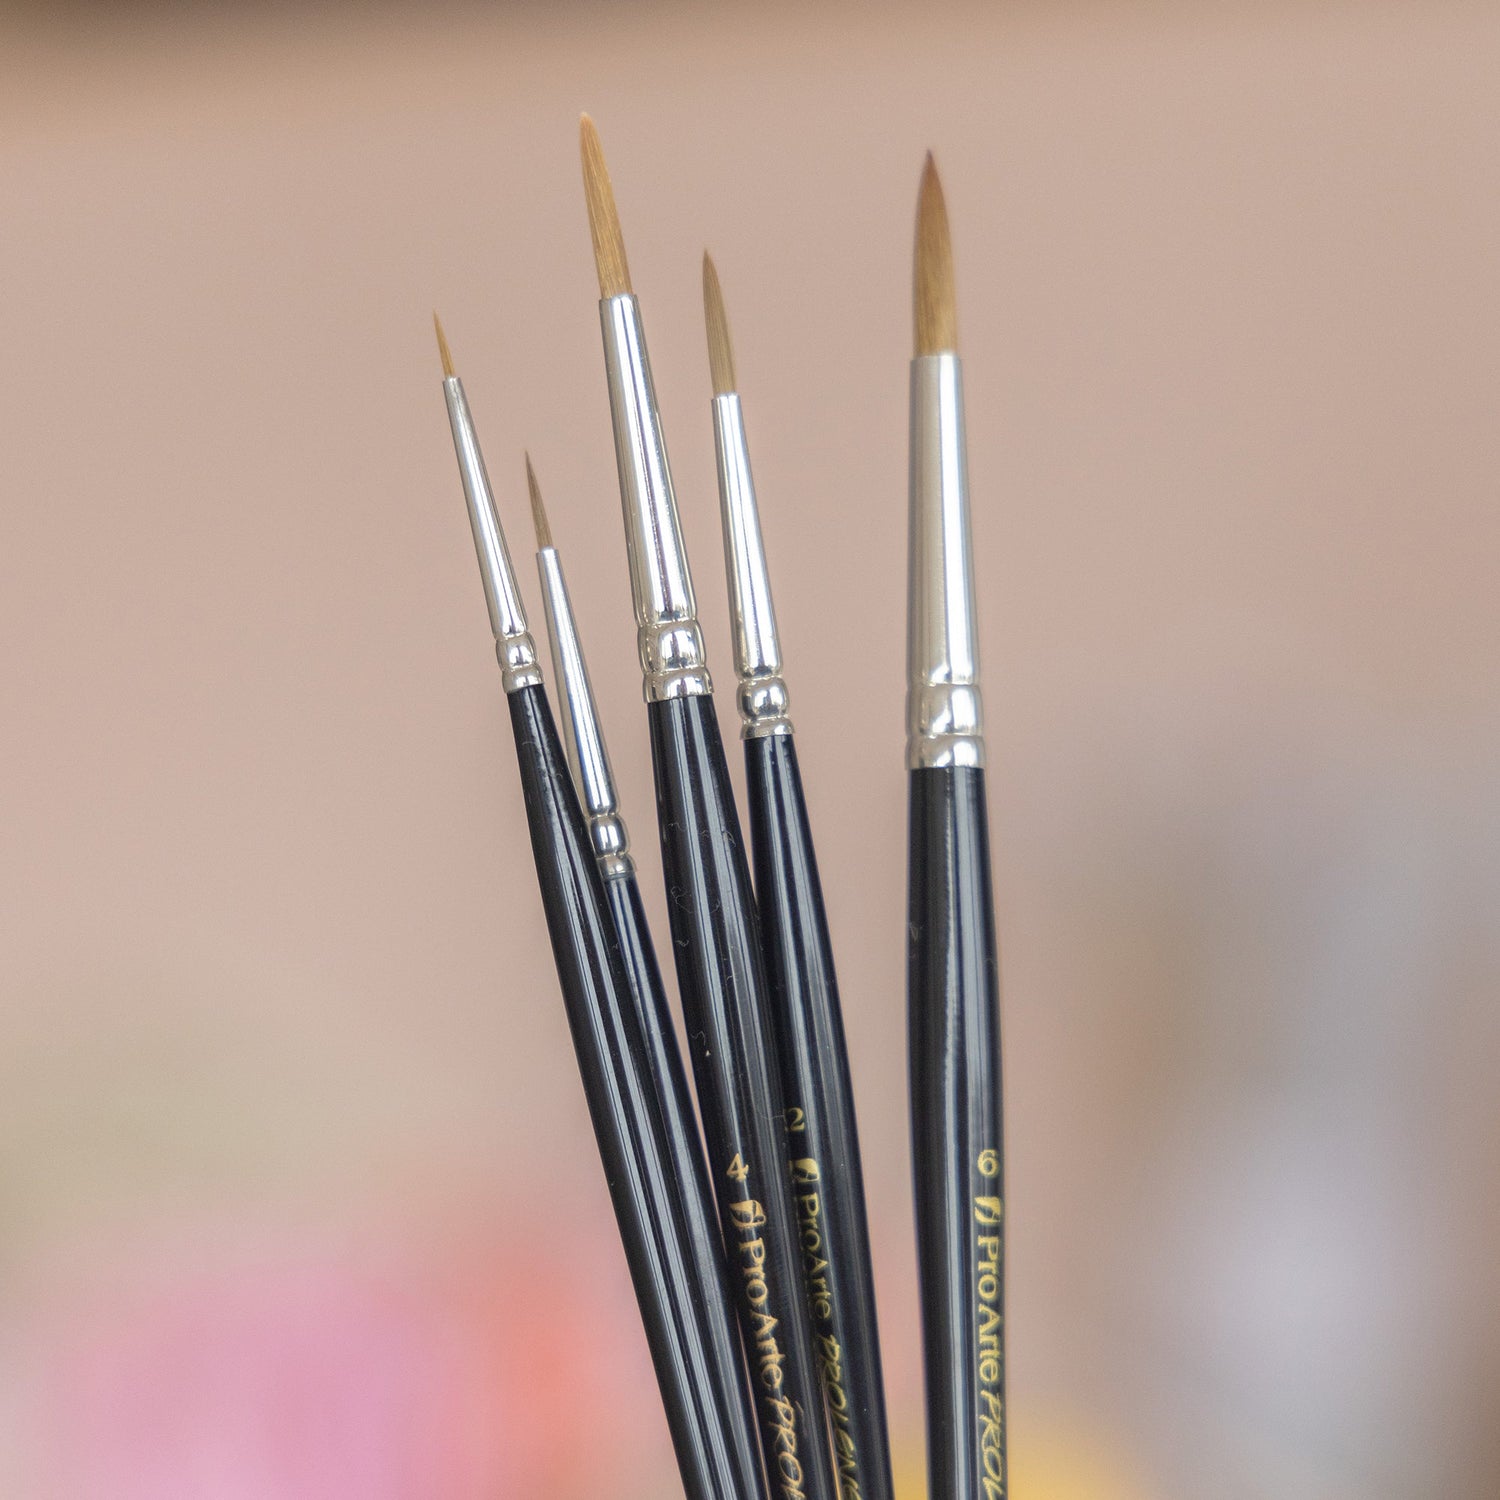 A selection of five Pro Arte Prolene synthetic round watercolour paint brushes in varying sizes.